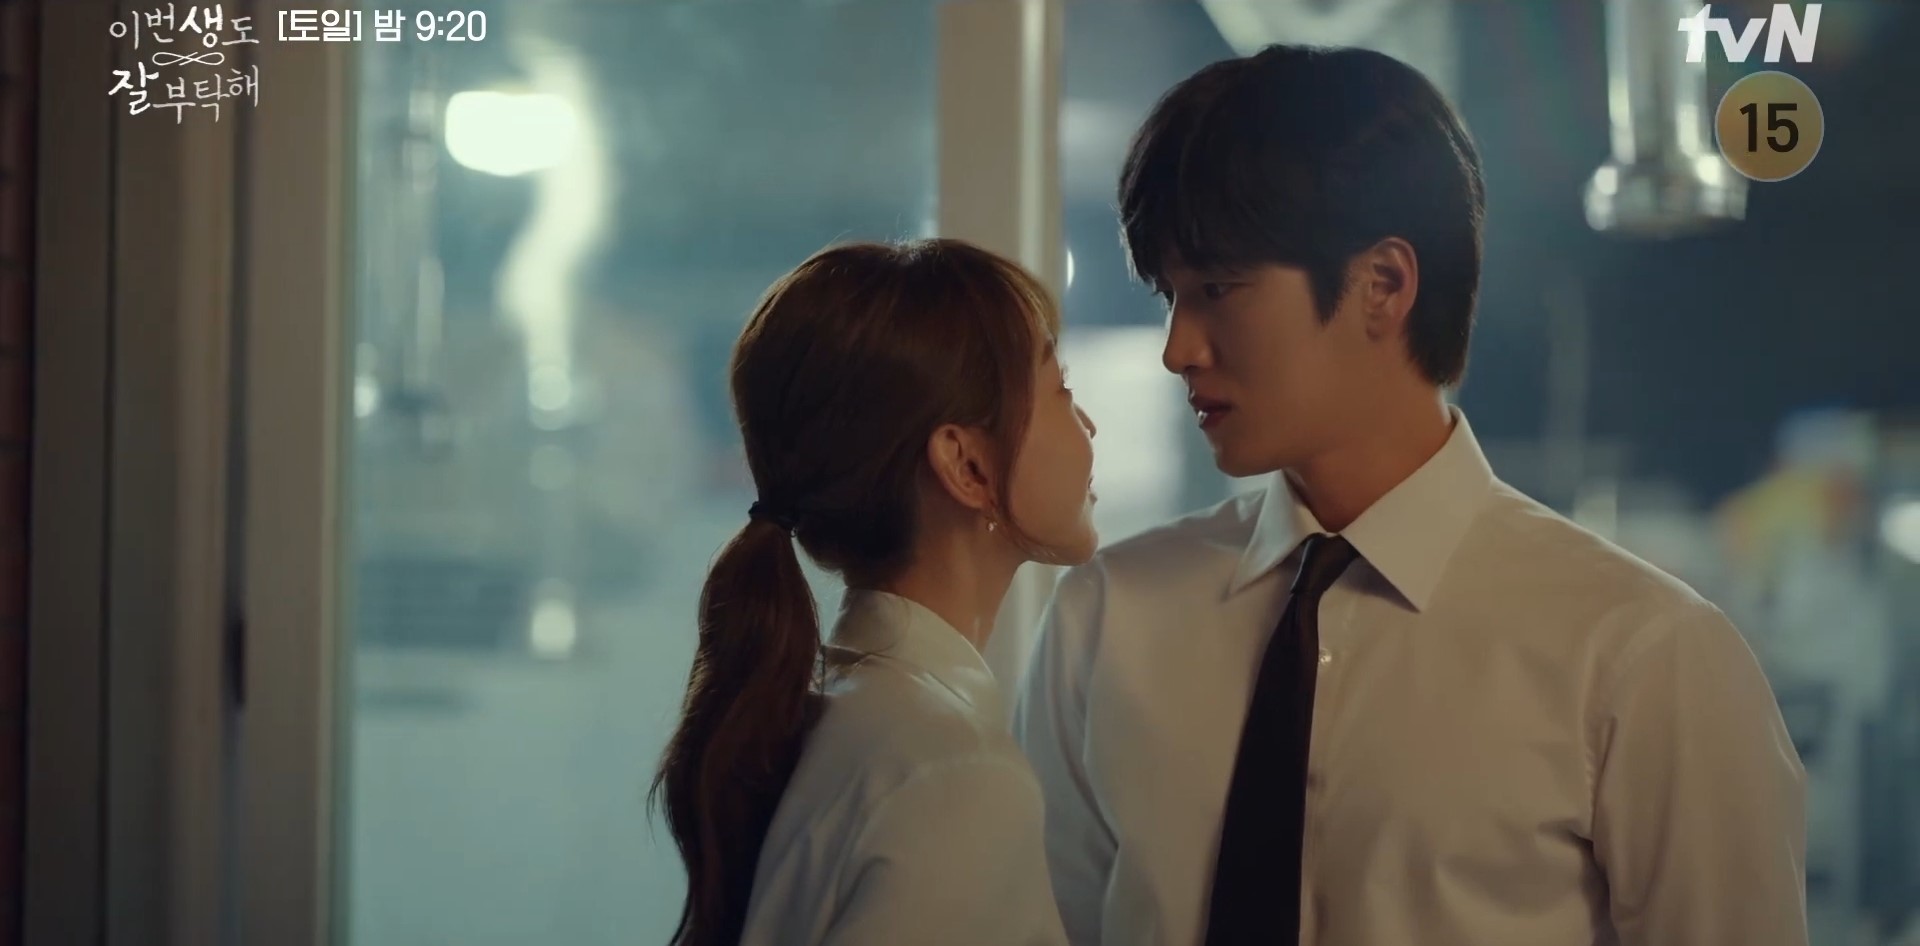 See You in My 19th Life Episode 5 Preview: When is it Releasing? What to Expect Next?